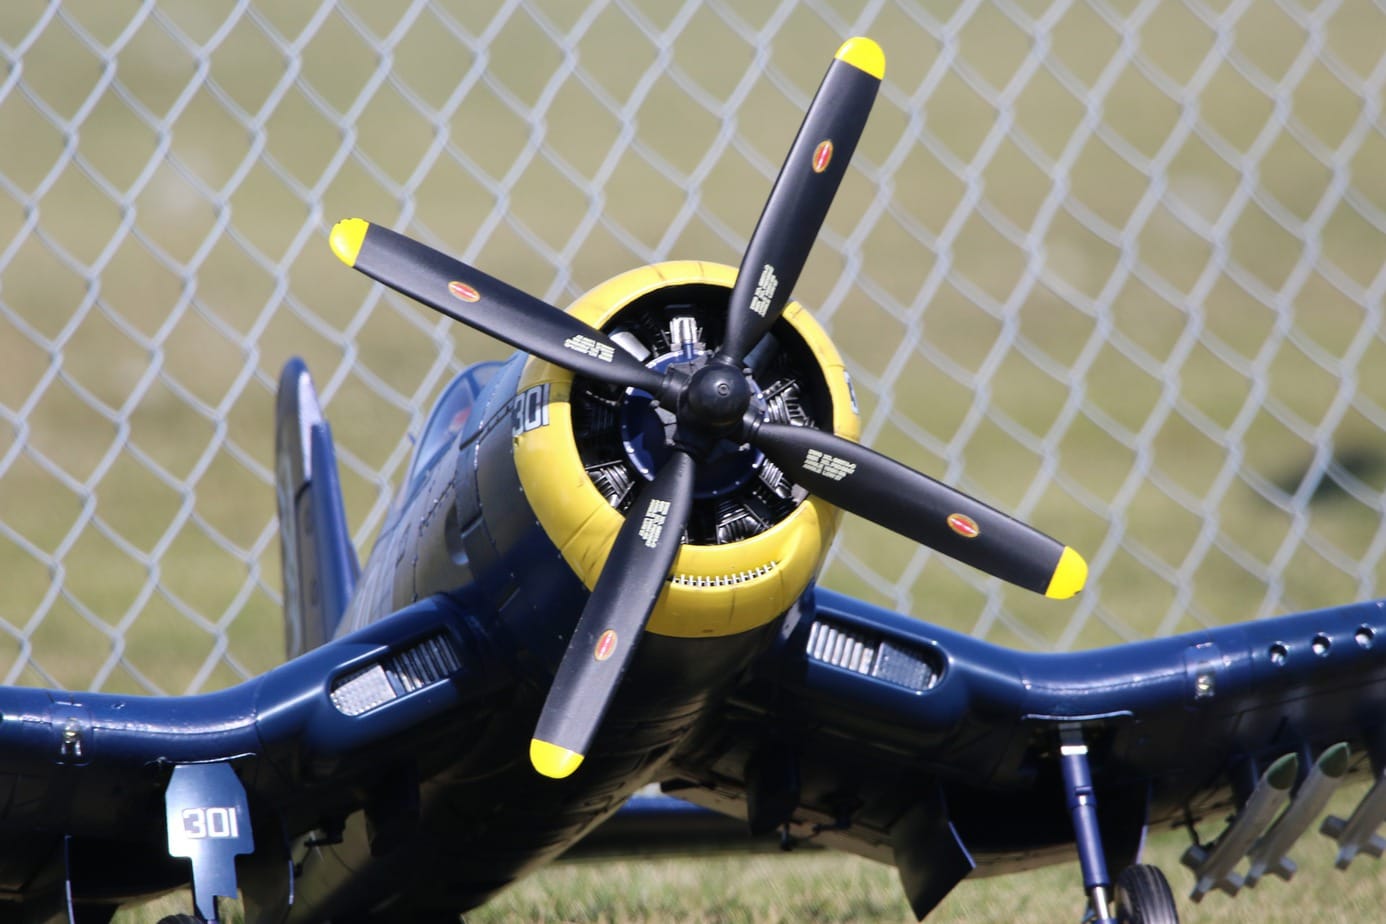 RC modeling – what remote control aircraft should I choose to start with?